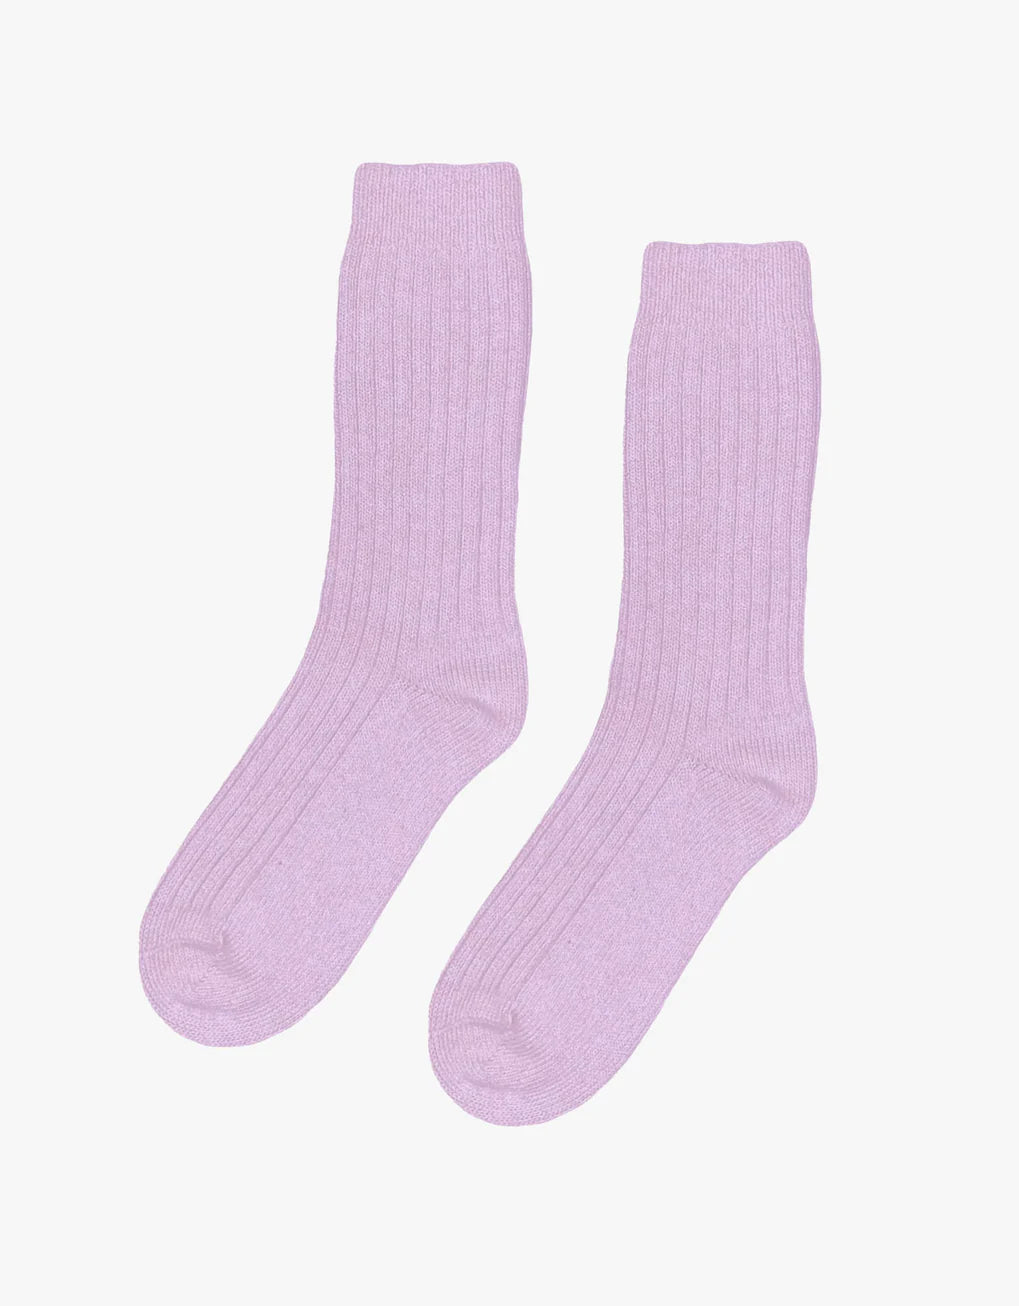 A pair of Colorful Standard Merino Wool Blend Socks made with recycled fibres on a white background.